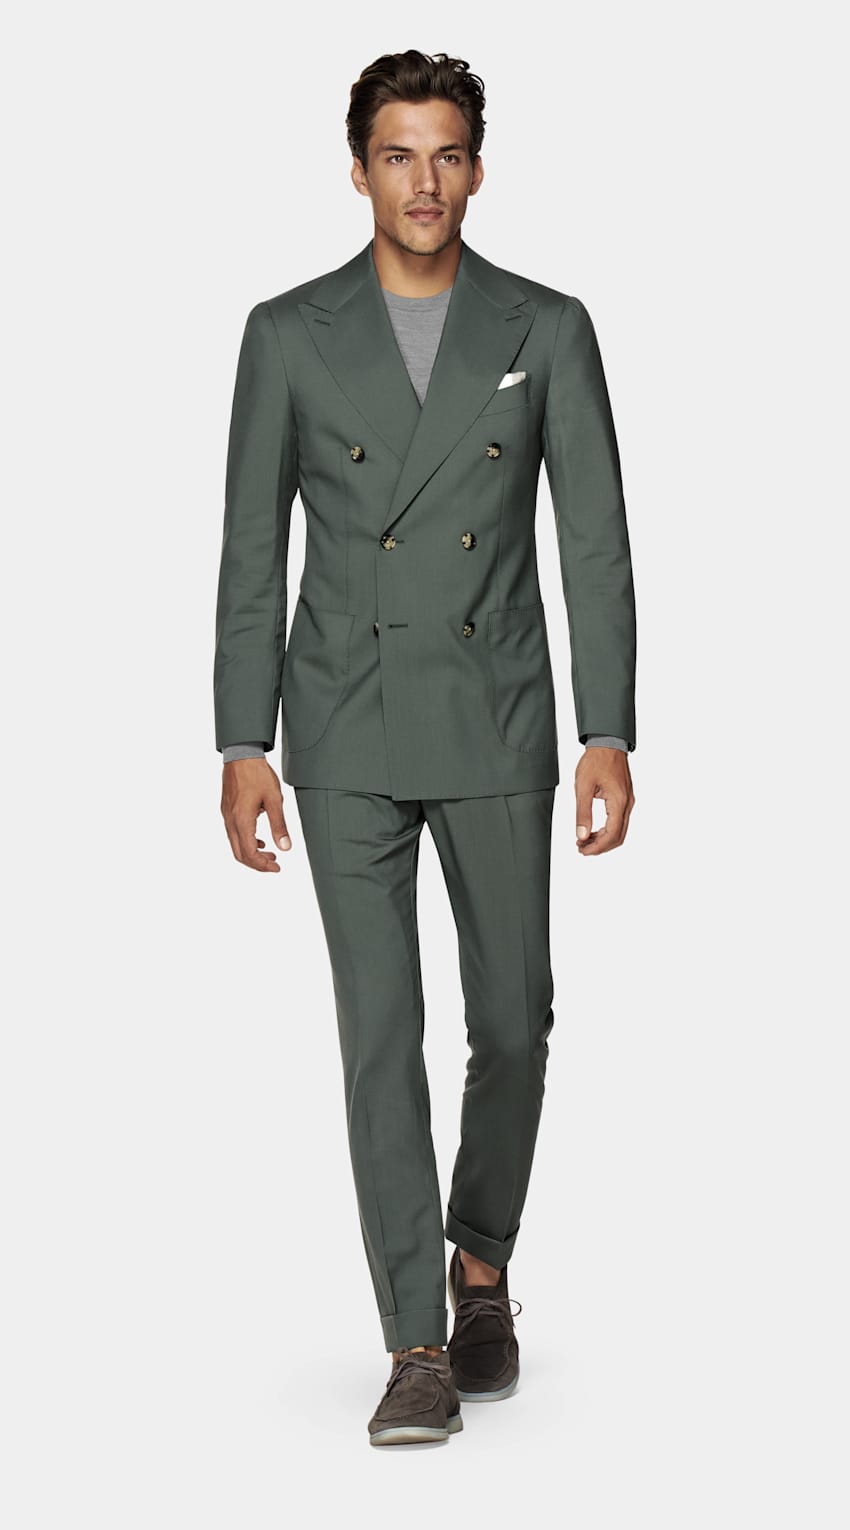 SUITSUPPLY Traceable Tropical Wool S120's by Vitale Barberis Canonico, Italy Light Green Custom Made Suit